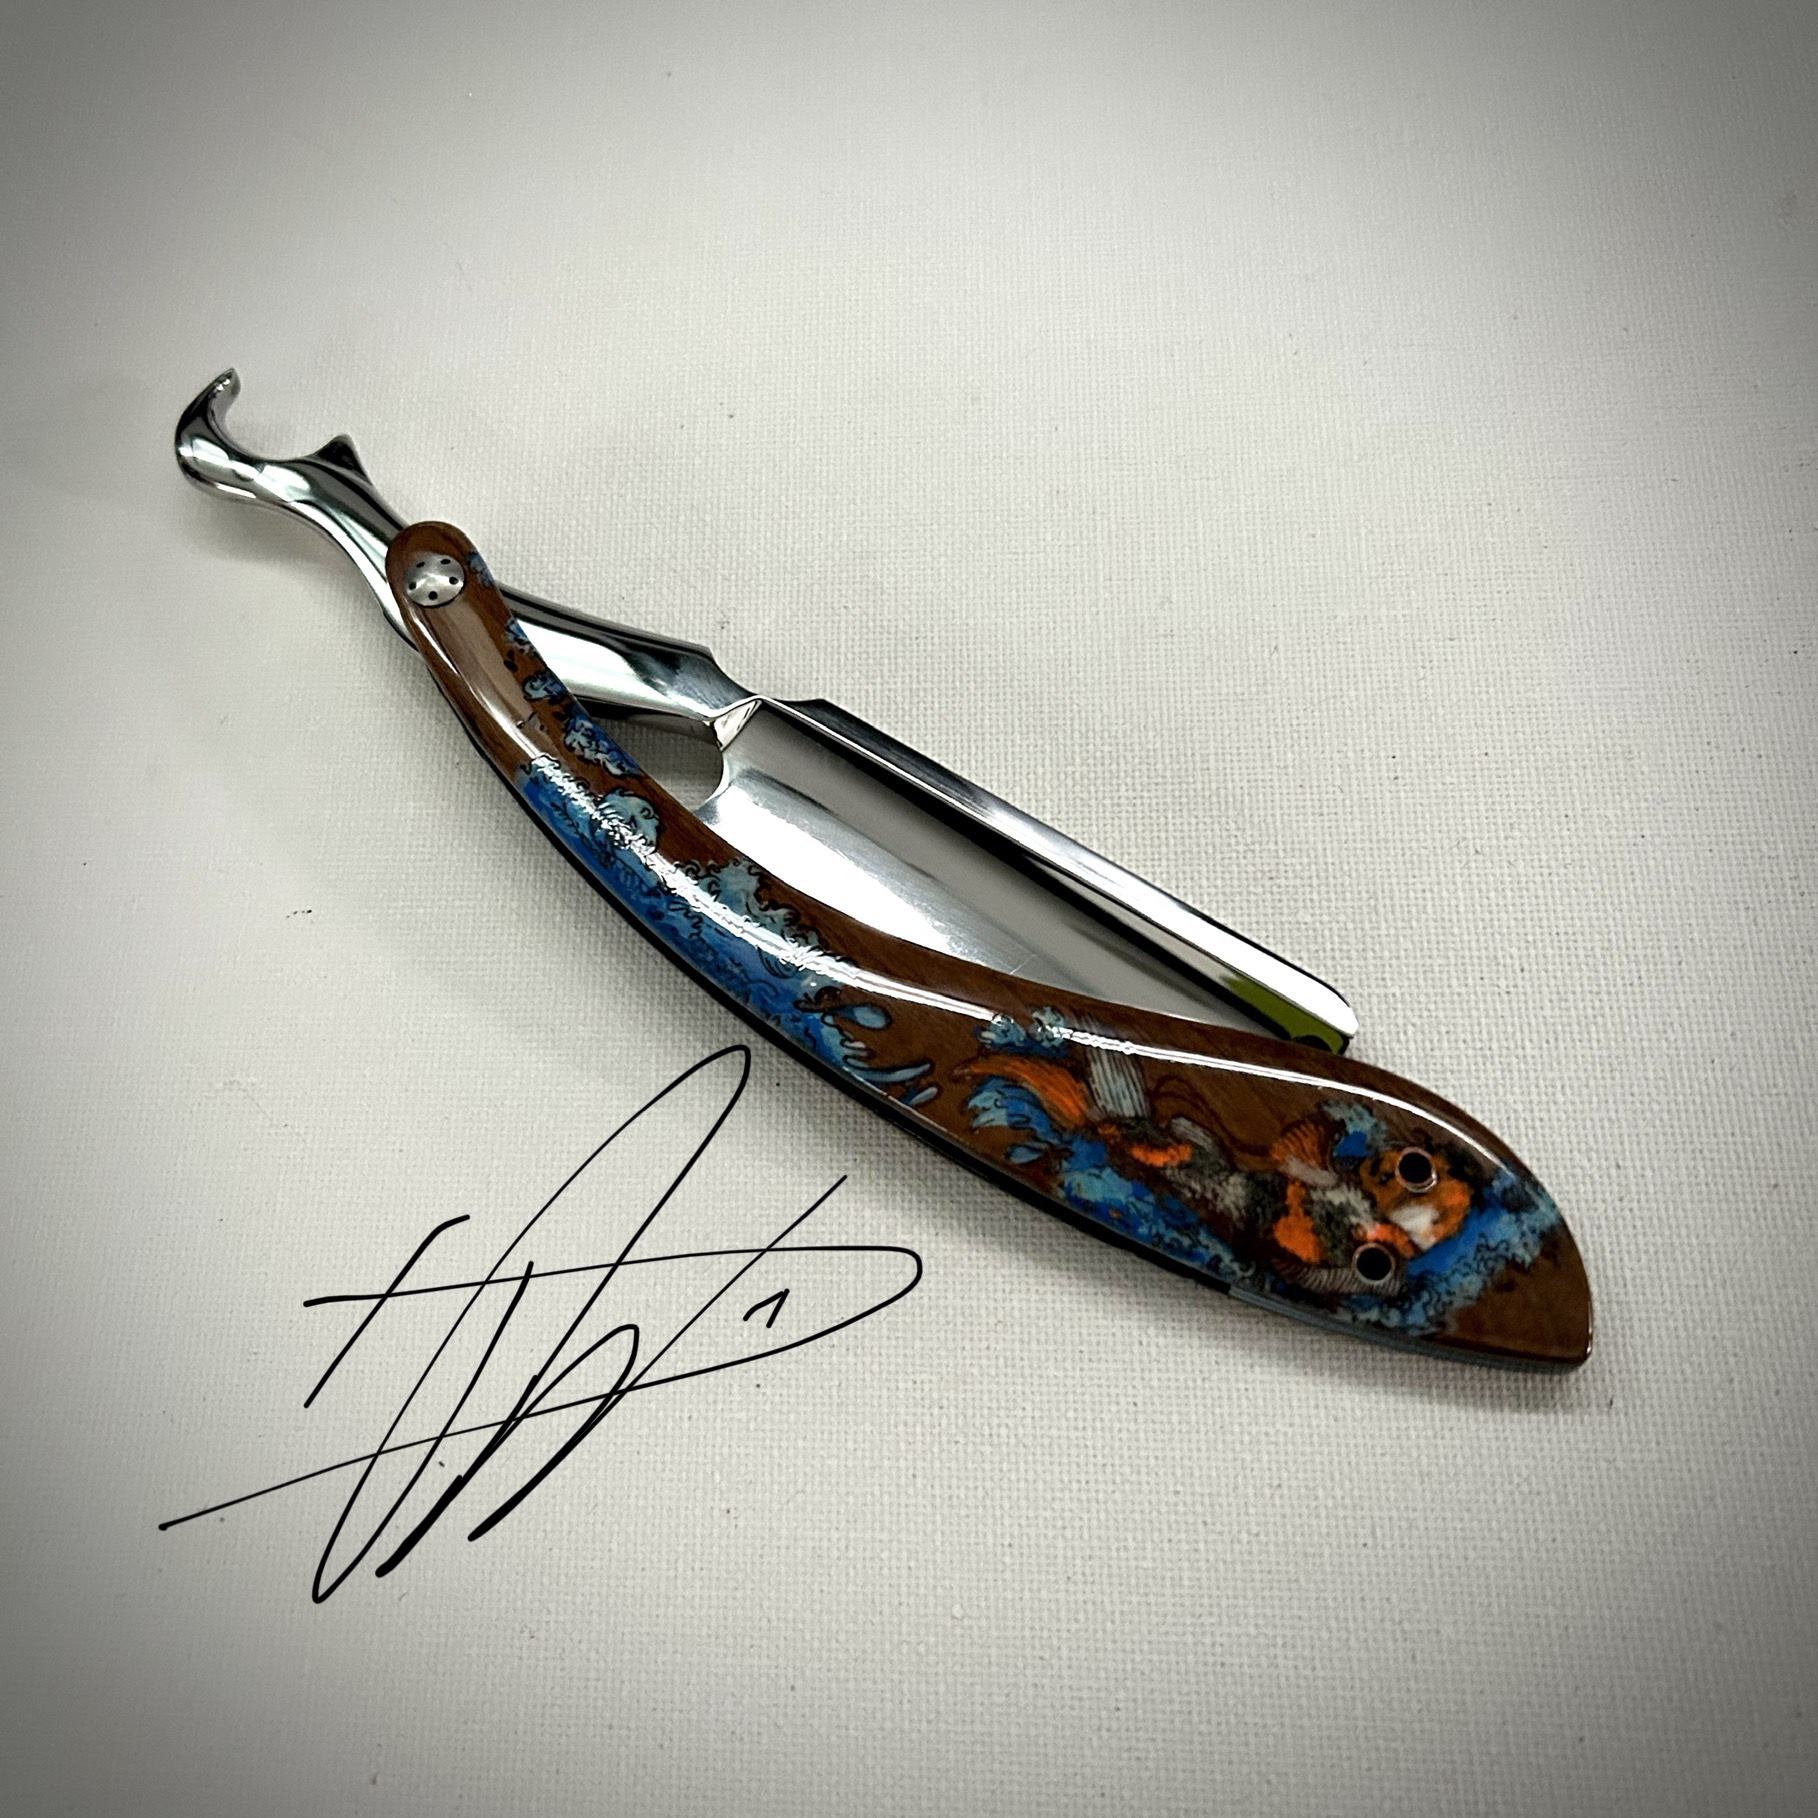 Woolfblades 347 Custom Made in a RWL34 razor ,And the scales are made in a solid wood with carbon fibre inlays the koi design is hand painted